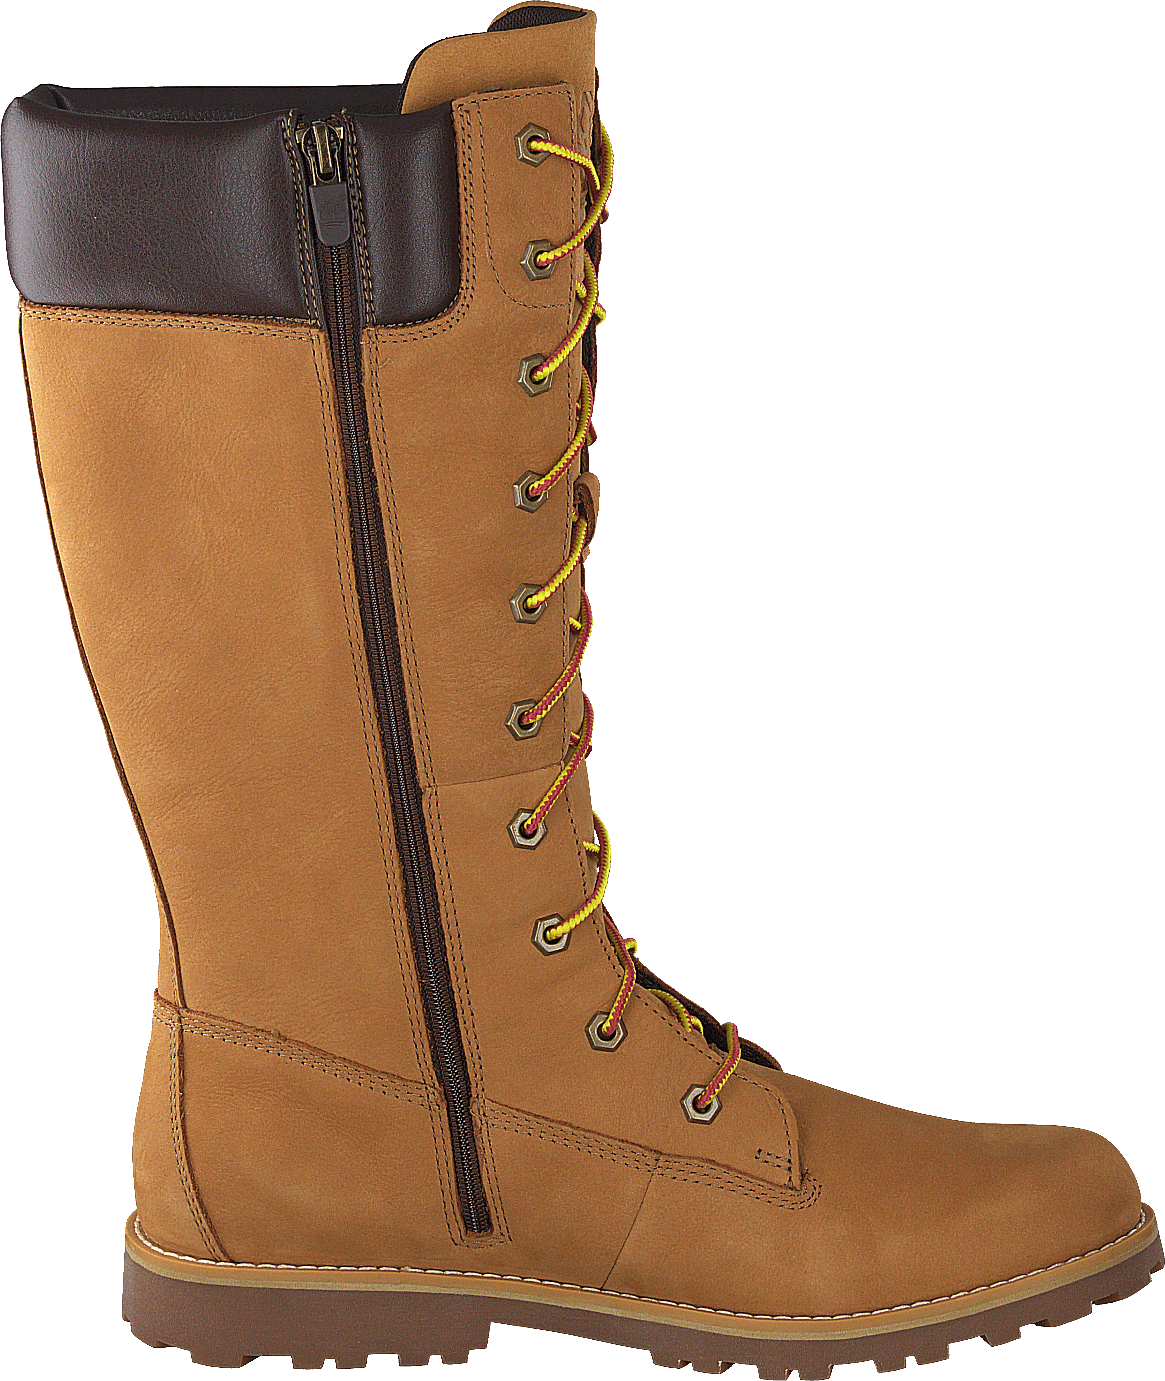 Girls Classic Tall Lace Up Wit Wheat